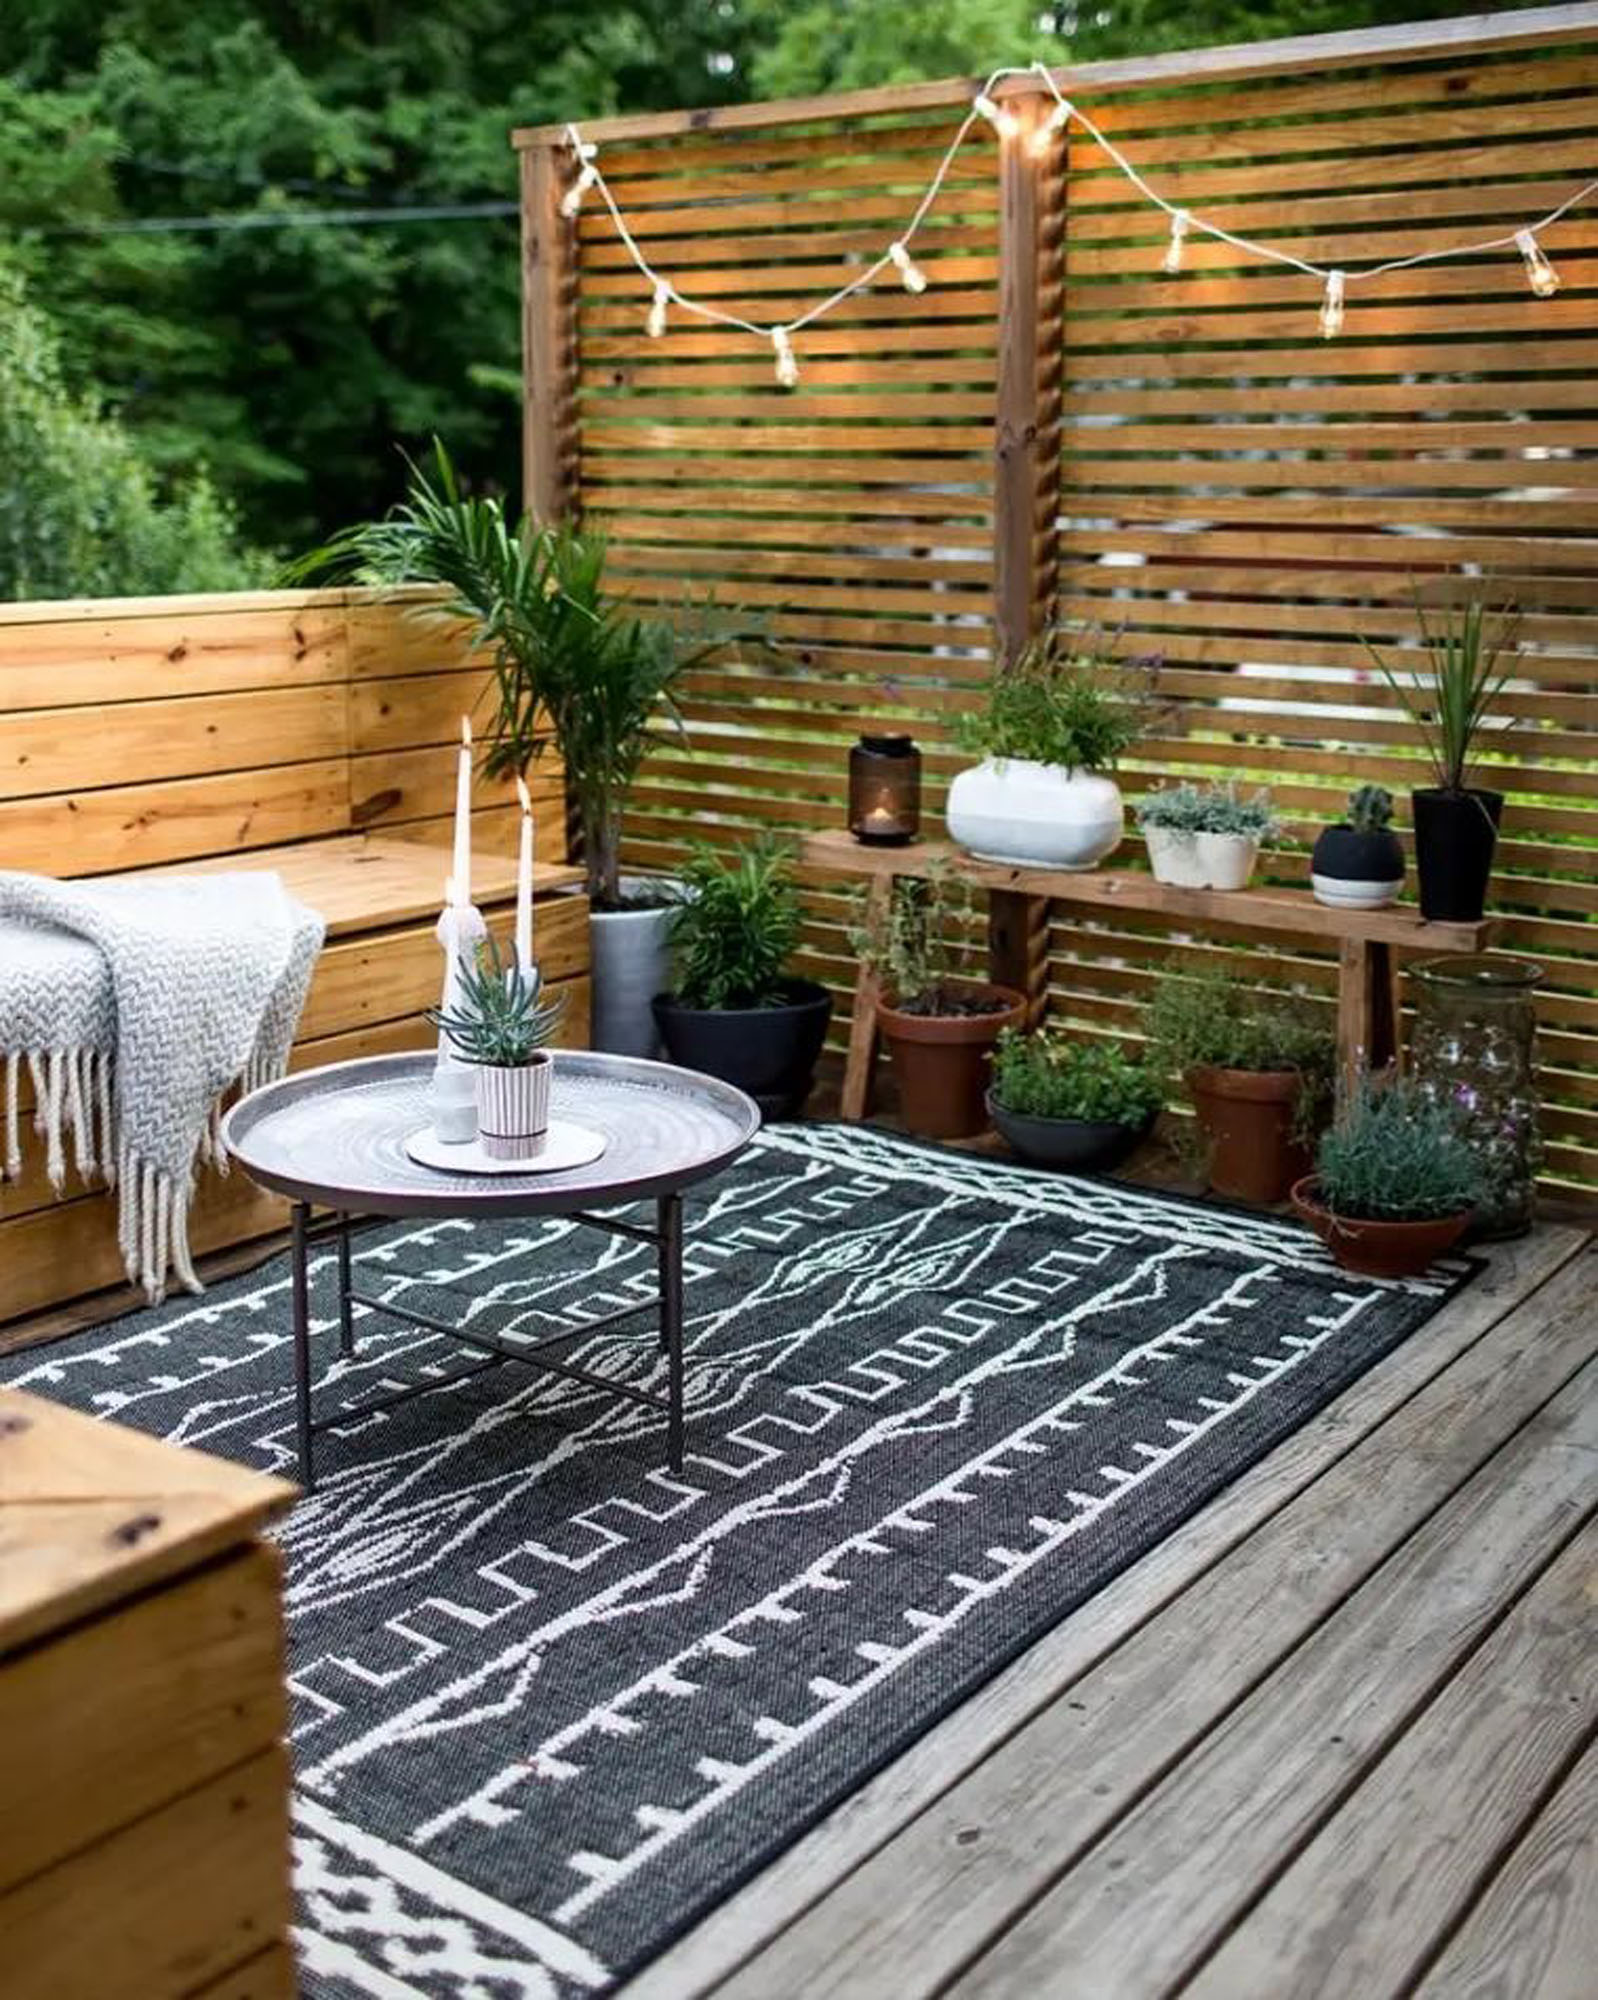 The Benefits Of Privacy Walls For An, Patio Privacy Wall Ideas